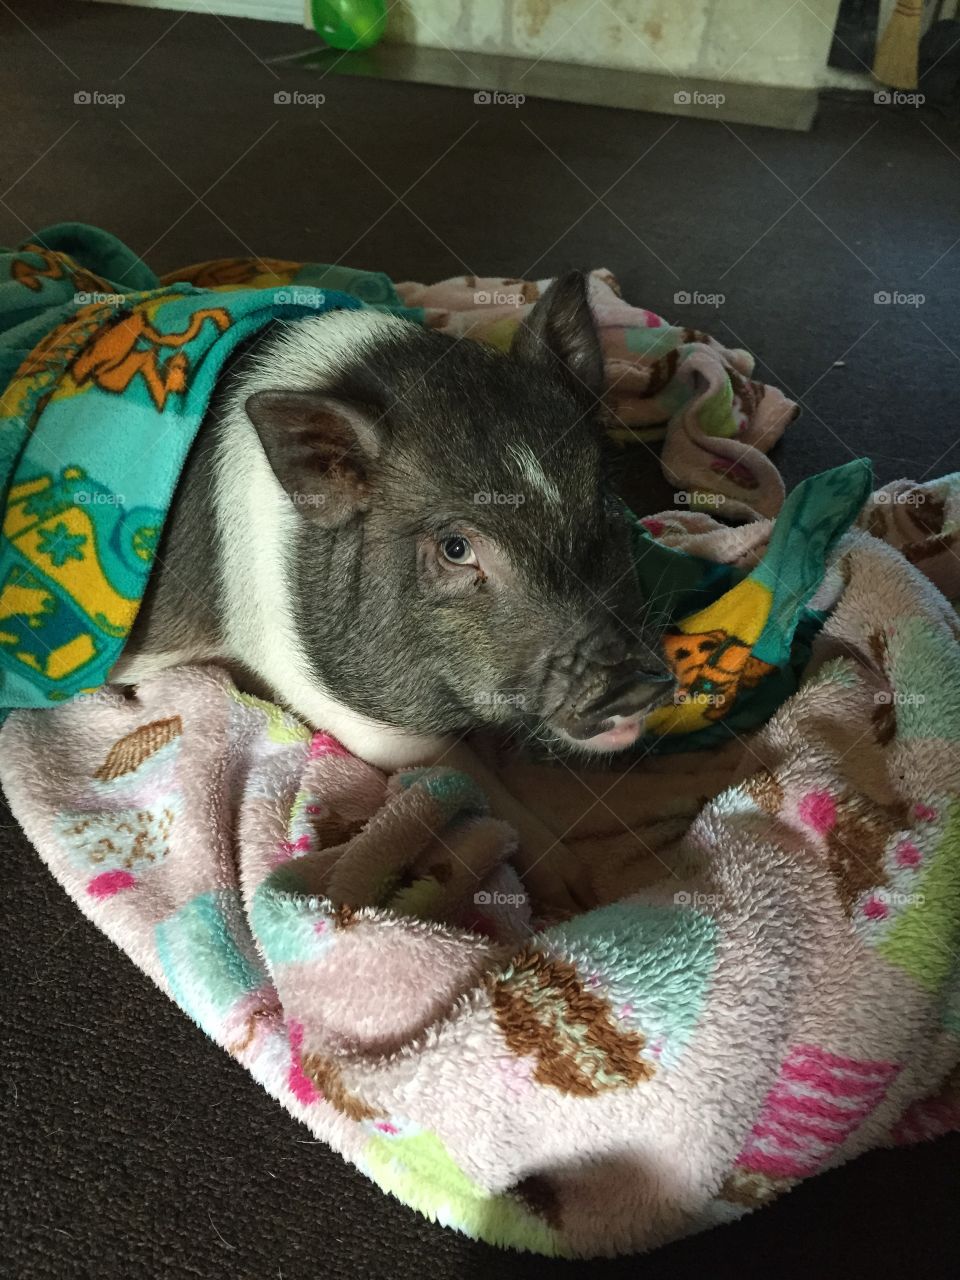 Pig in a blanket. Our potbelly pig, Truffles loves blankets!